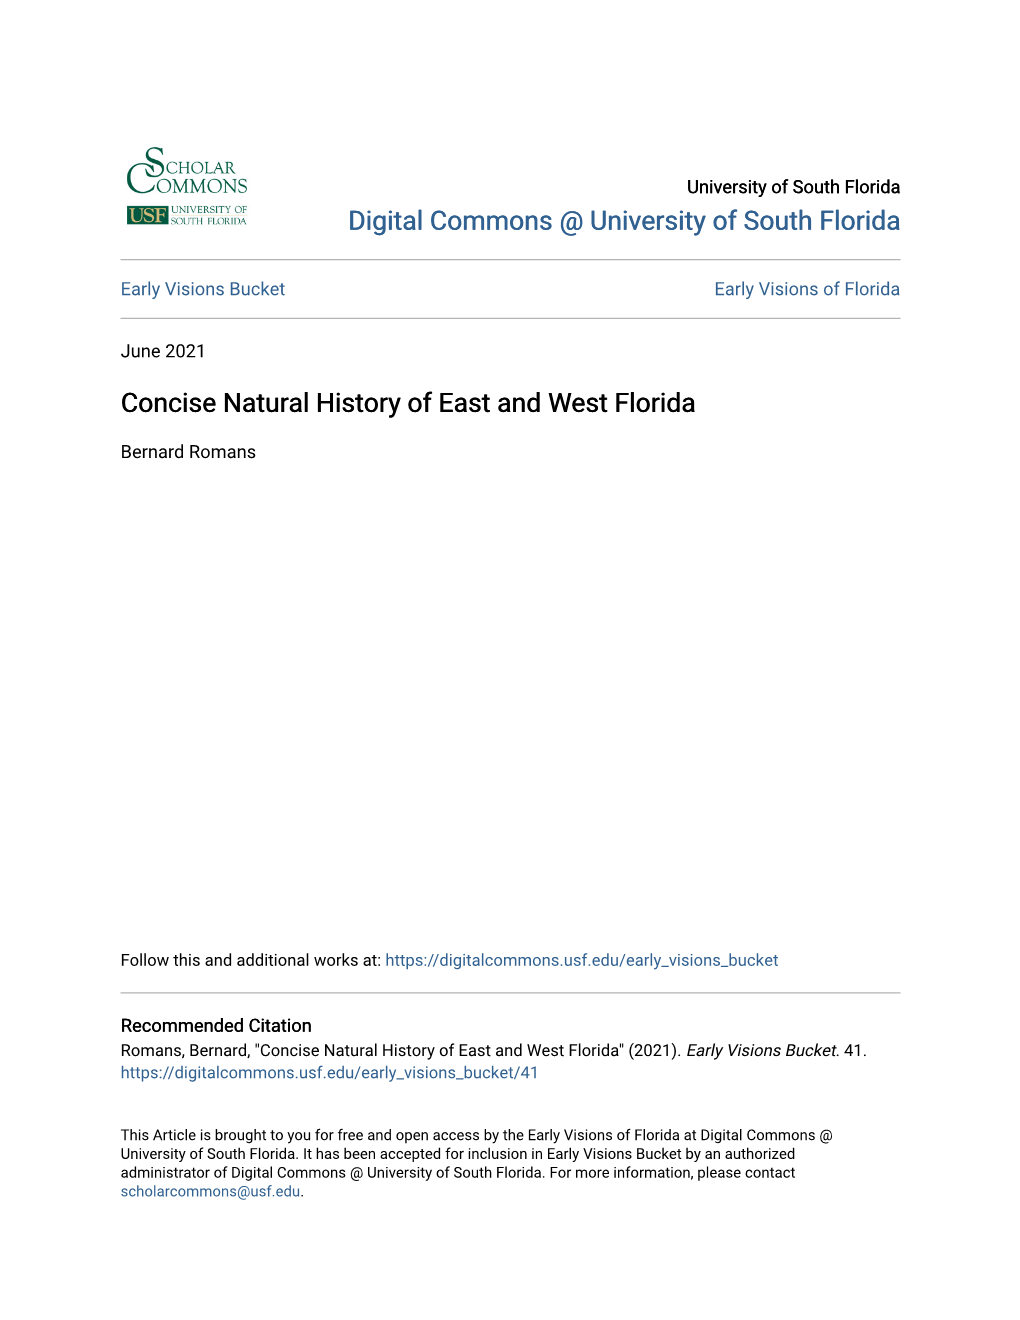 Bernard Romans, a Concise Natural History of East and West Florida Early Visions of Florida